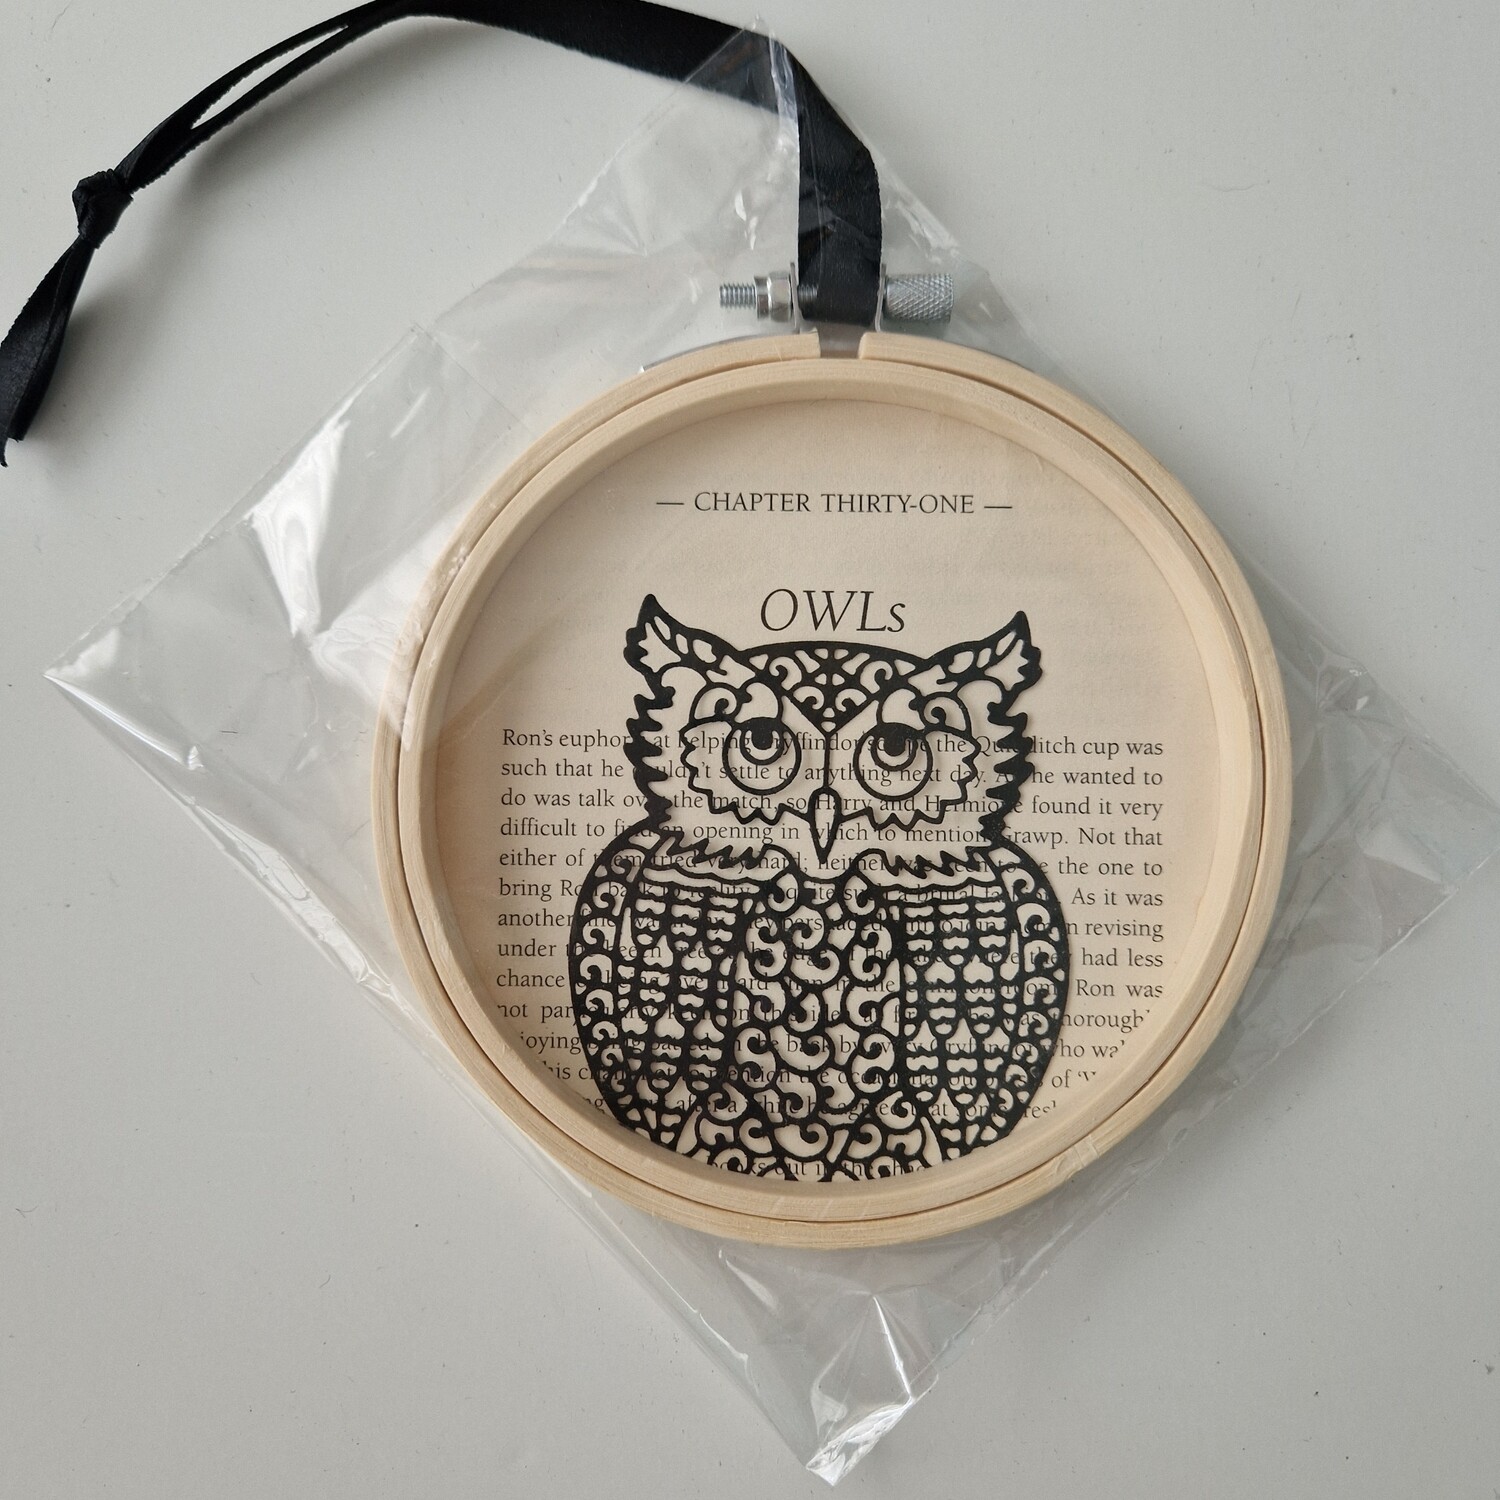 Harry Potter OWLs book art made from an original book page - READY TO SHIP